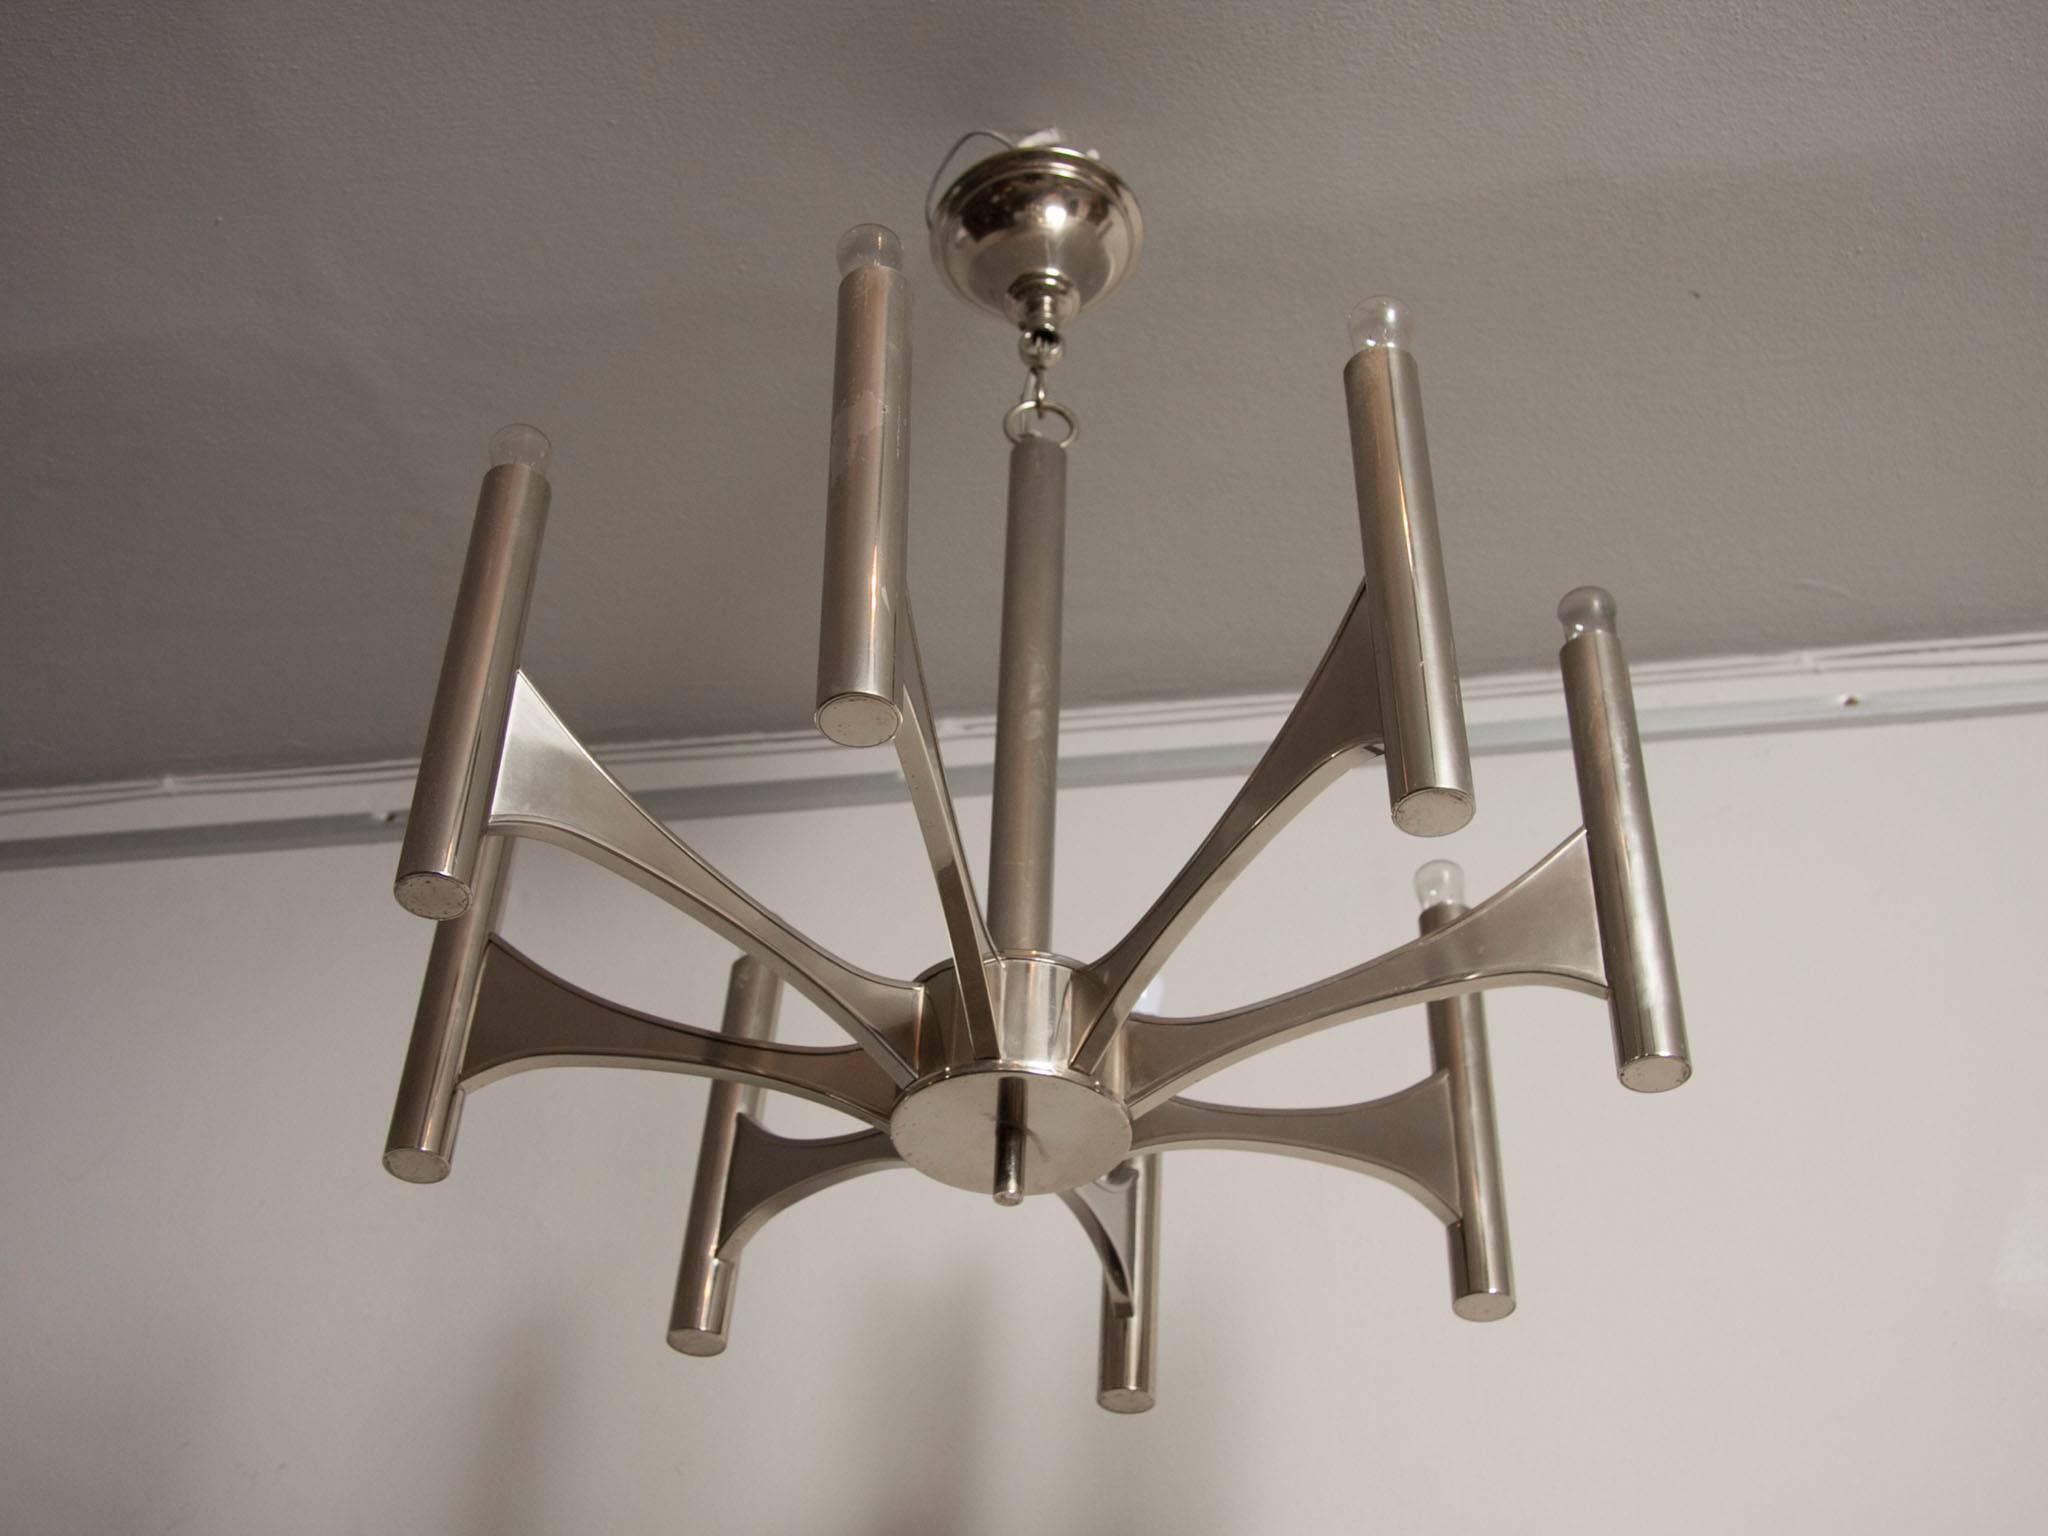 1960s Italian chrome eight-arm chandelier designed by Gaetano Sciolari. PAT tested and in full working order. The eight vertical tubular arms each require a small 15W screw-in pygmy bulb in the top.

A striking statement piece for a high